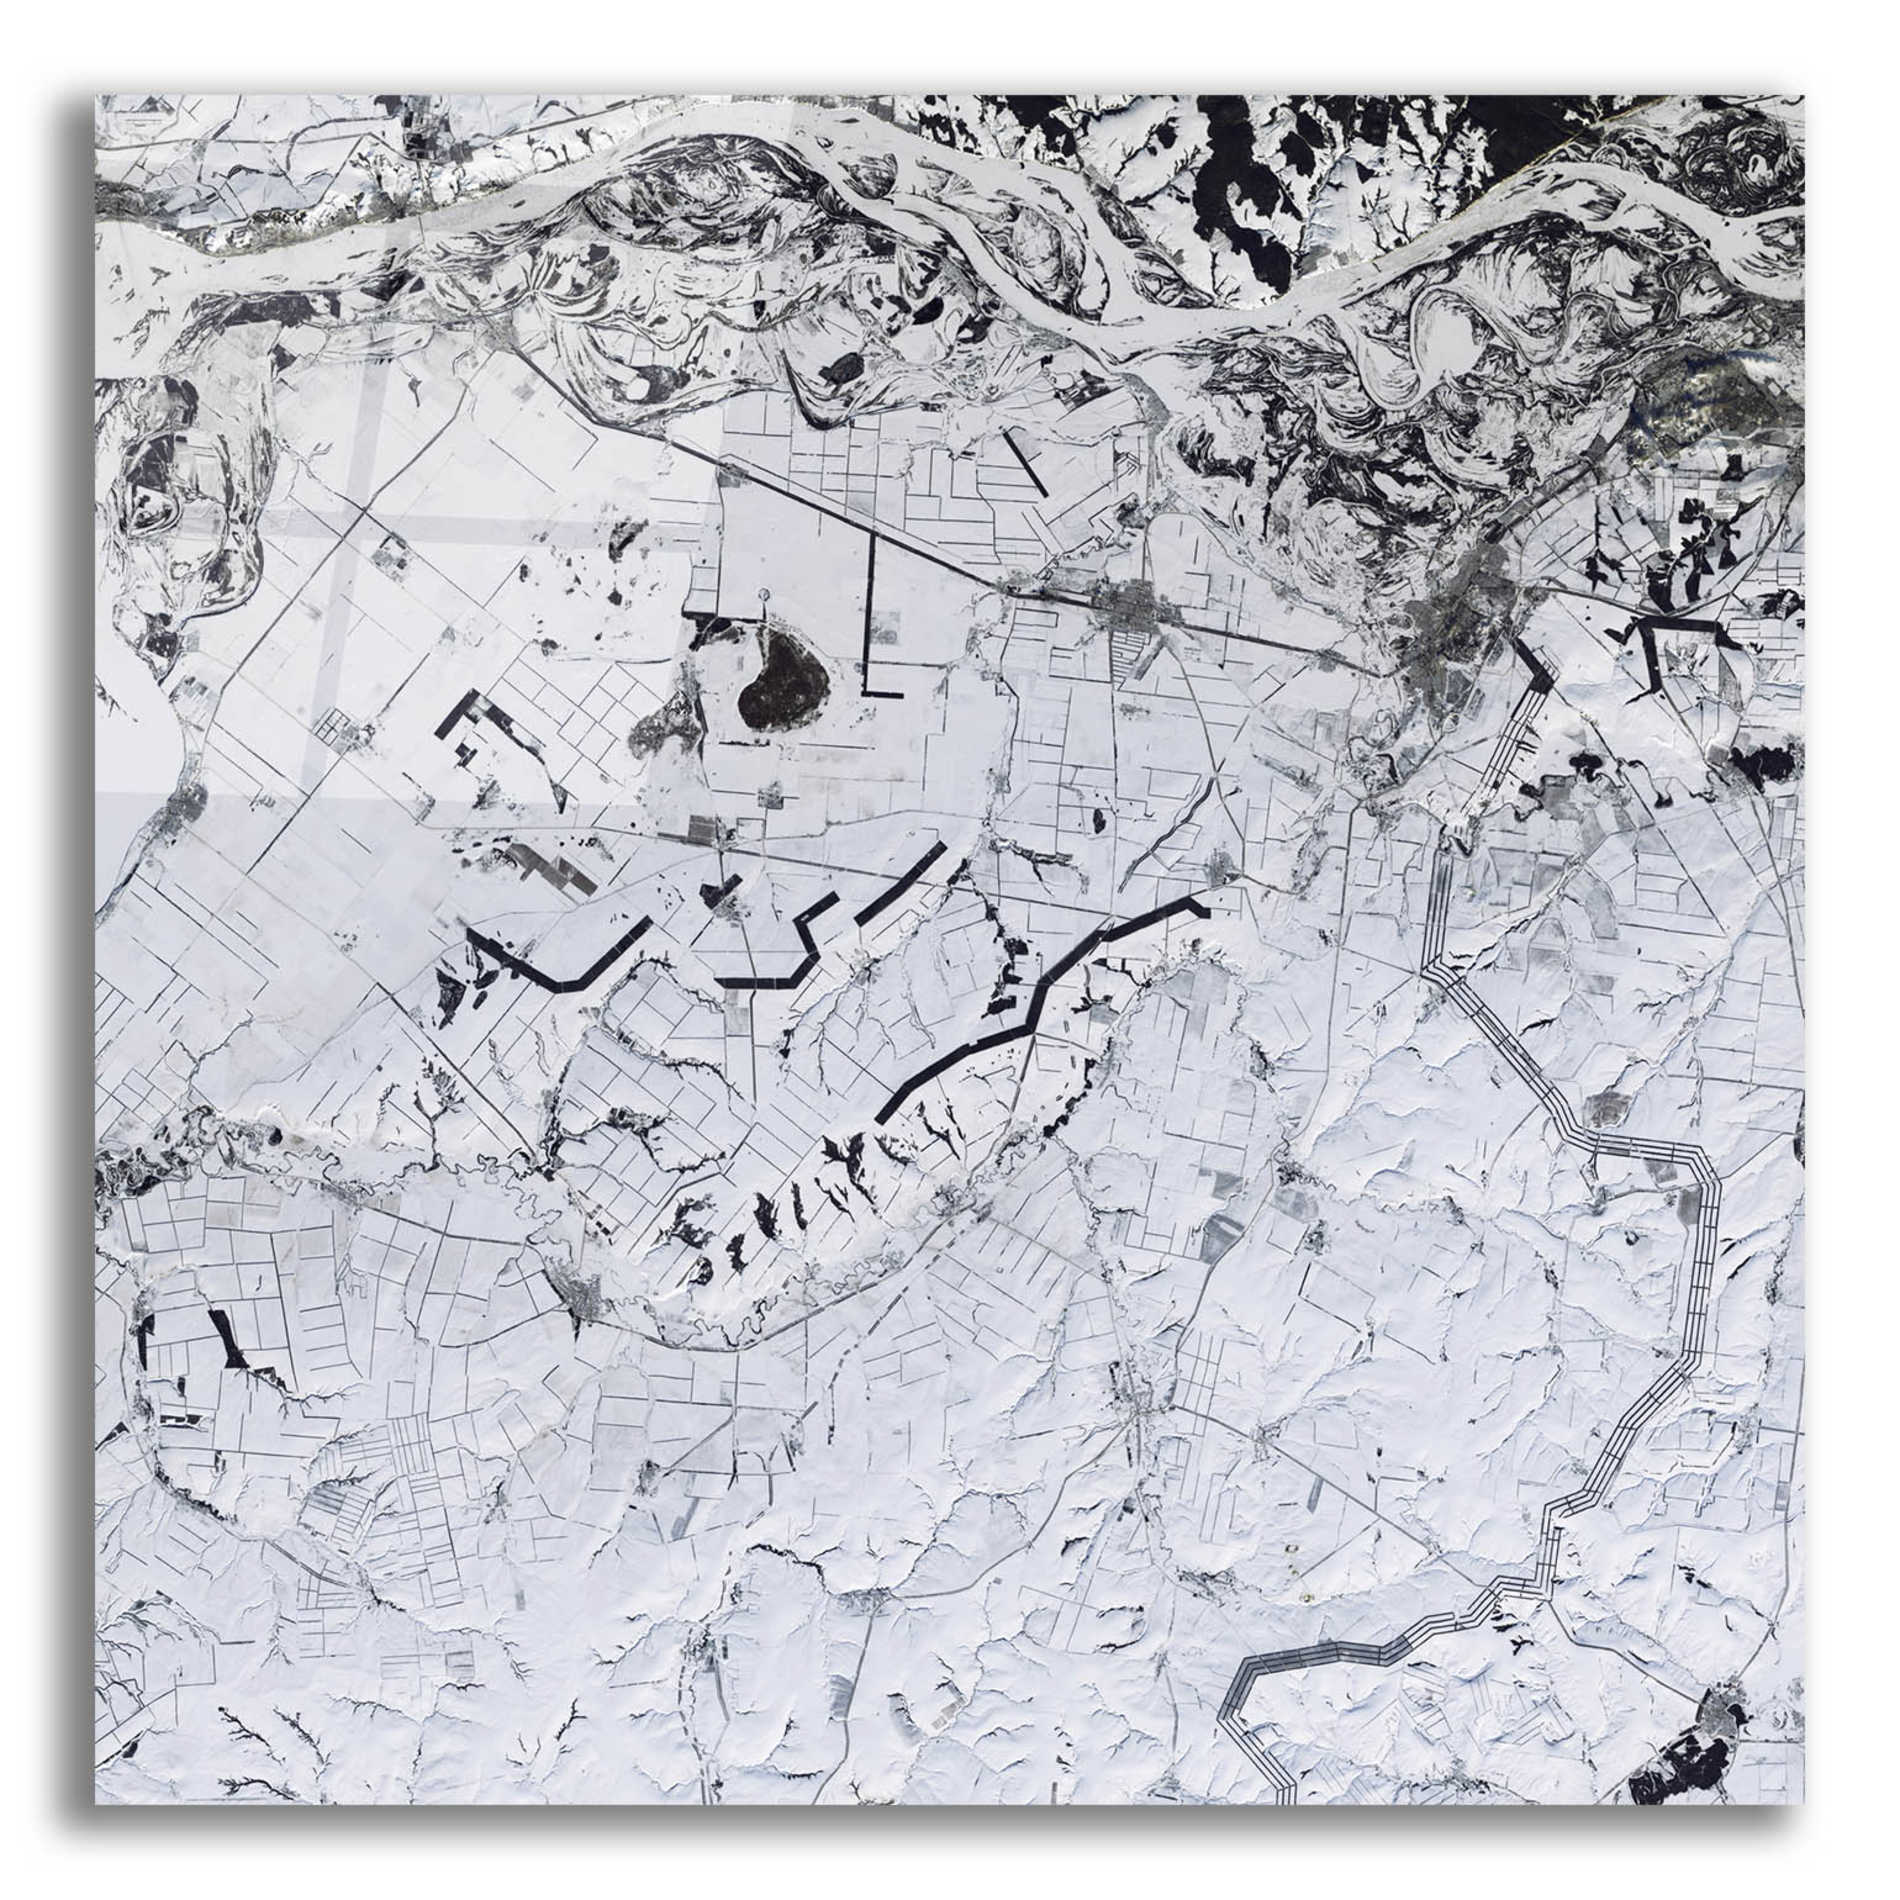 Epic Art 'Earth as Art: Etched in Snow,' Acrylic Glass Wall Art,12x12x1.1x0,18x18x1.1x0,26x26x1.74x0,37x37x1.74x0